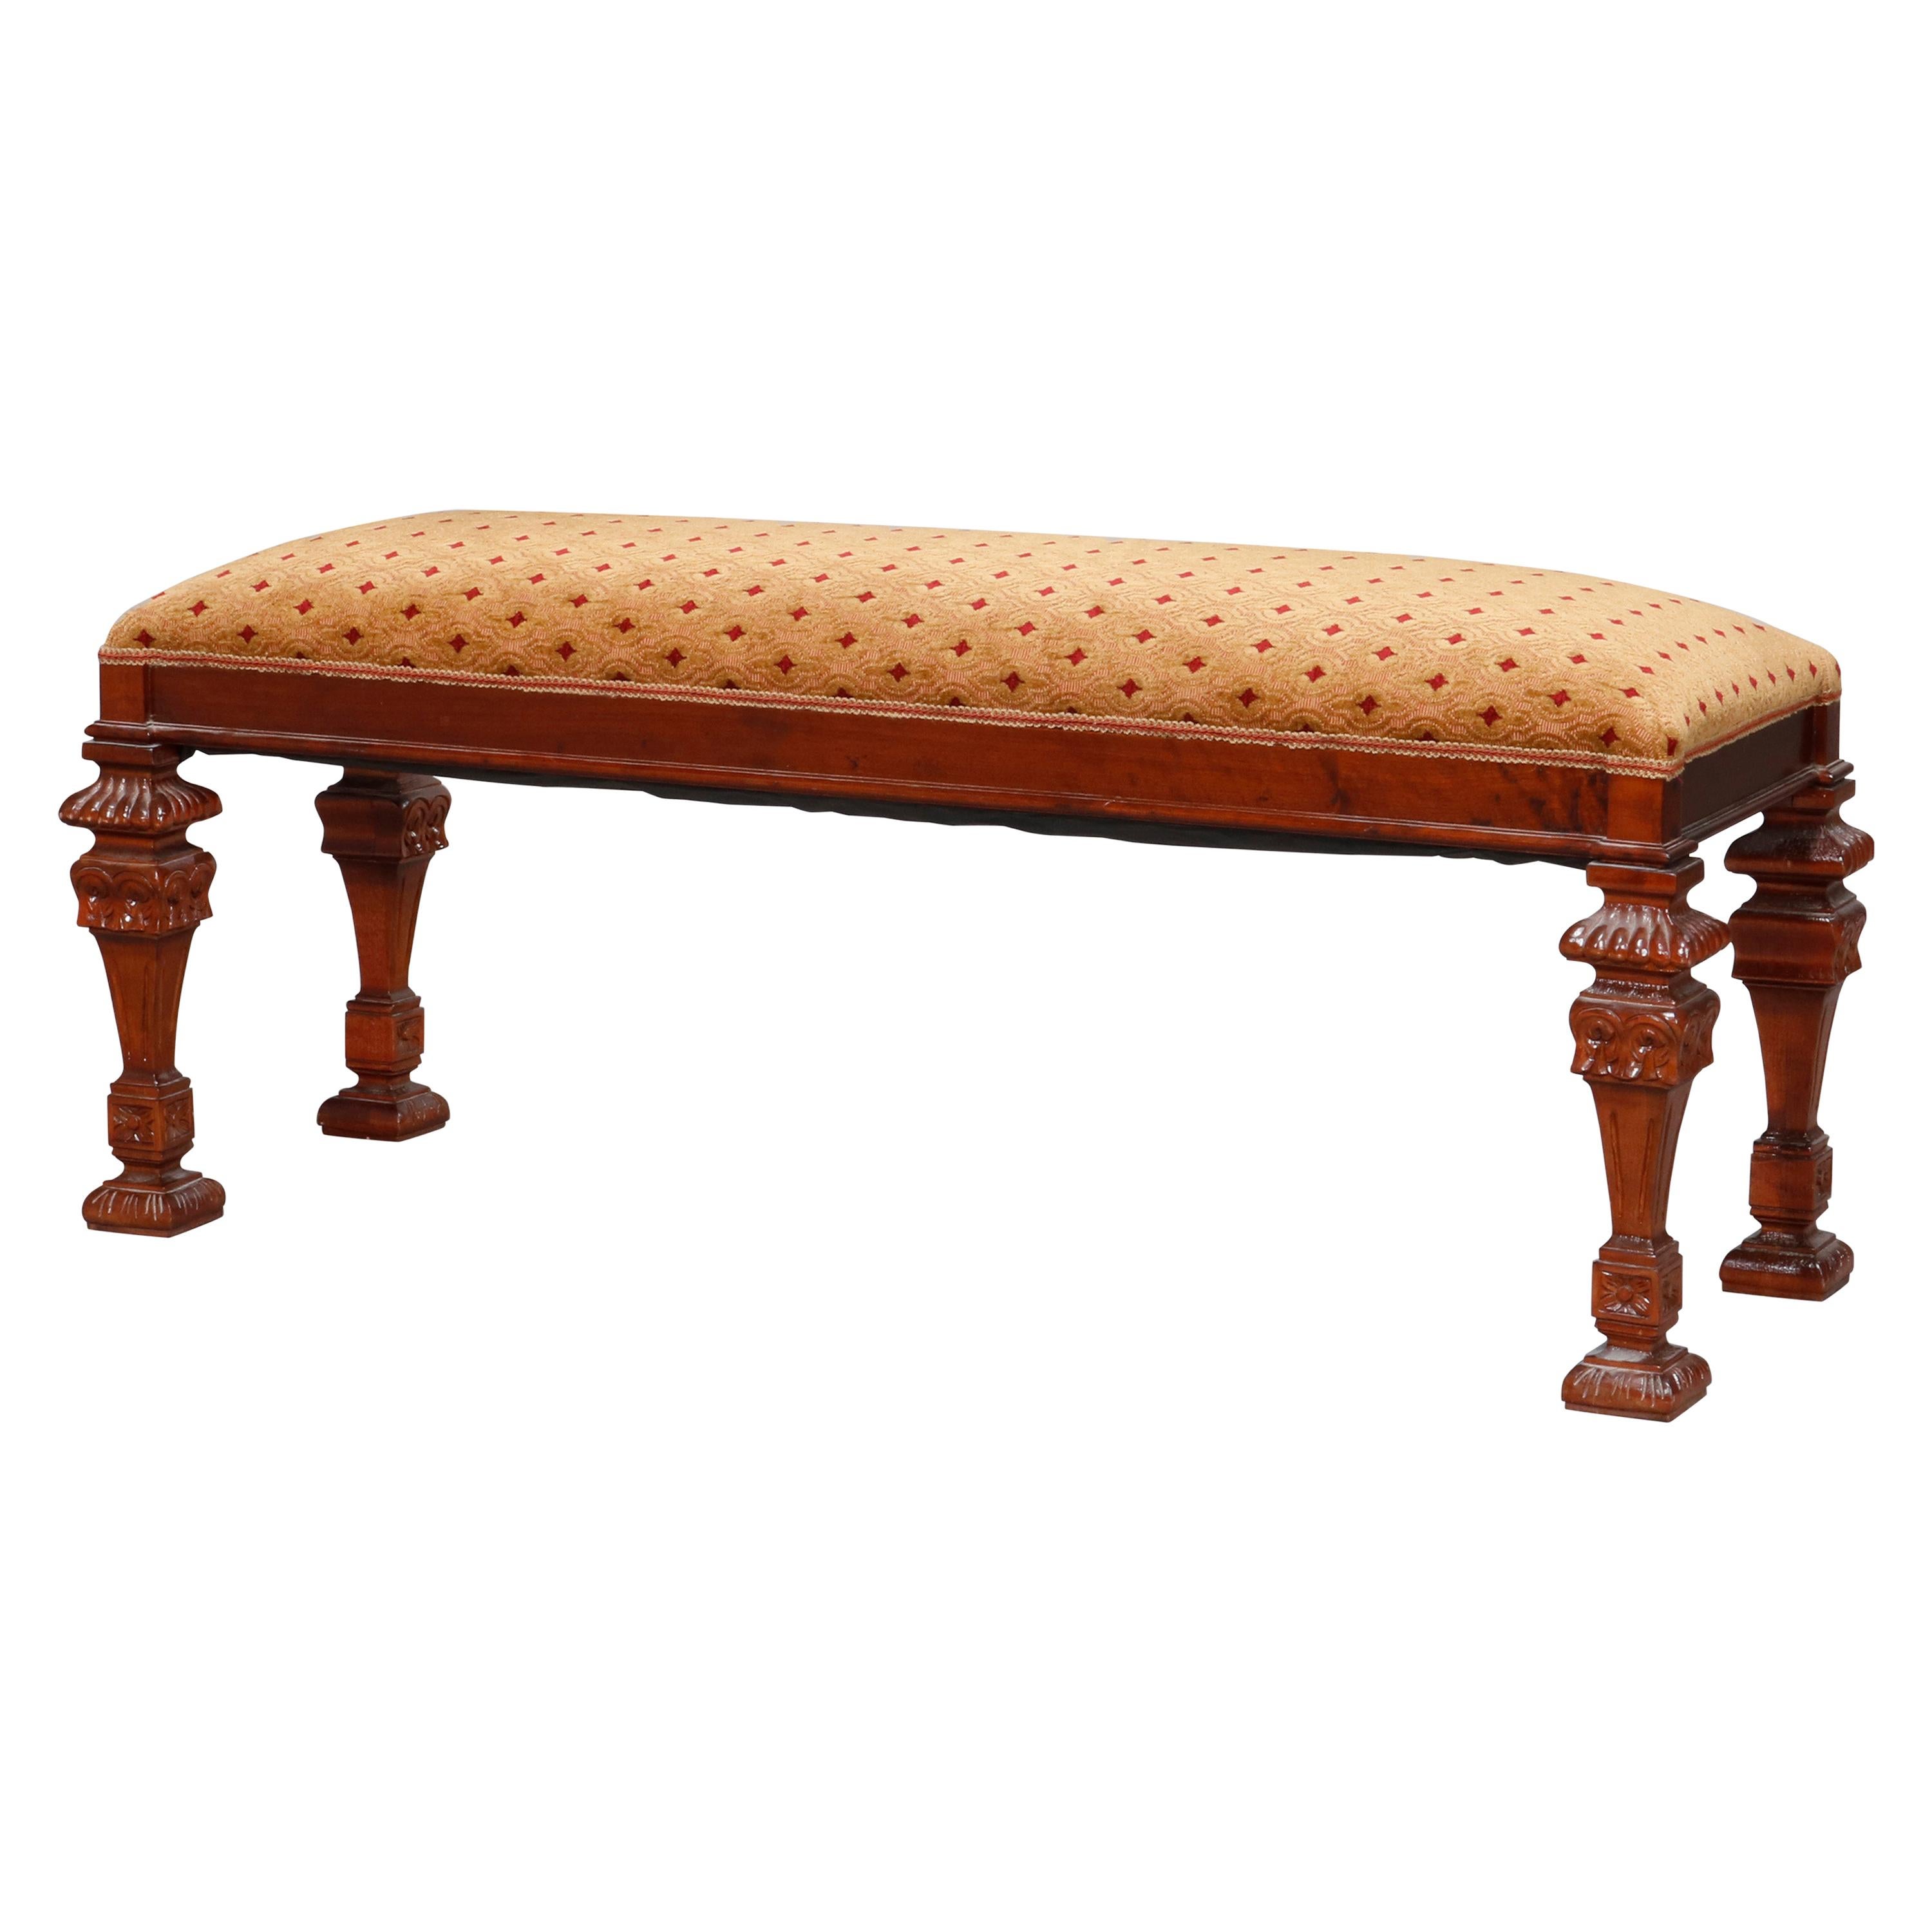 Vintage Continental Carved Mahogany Upholstered Long Bench, 20th Century